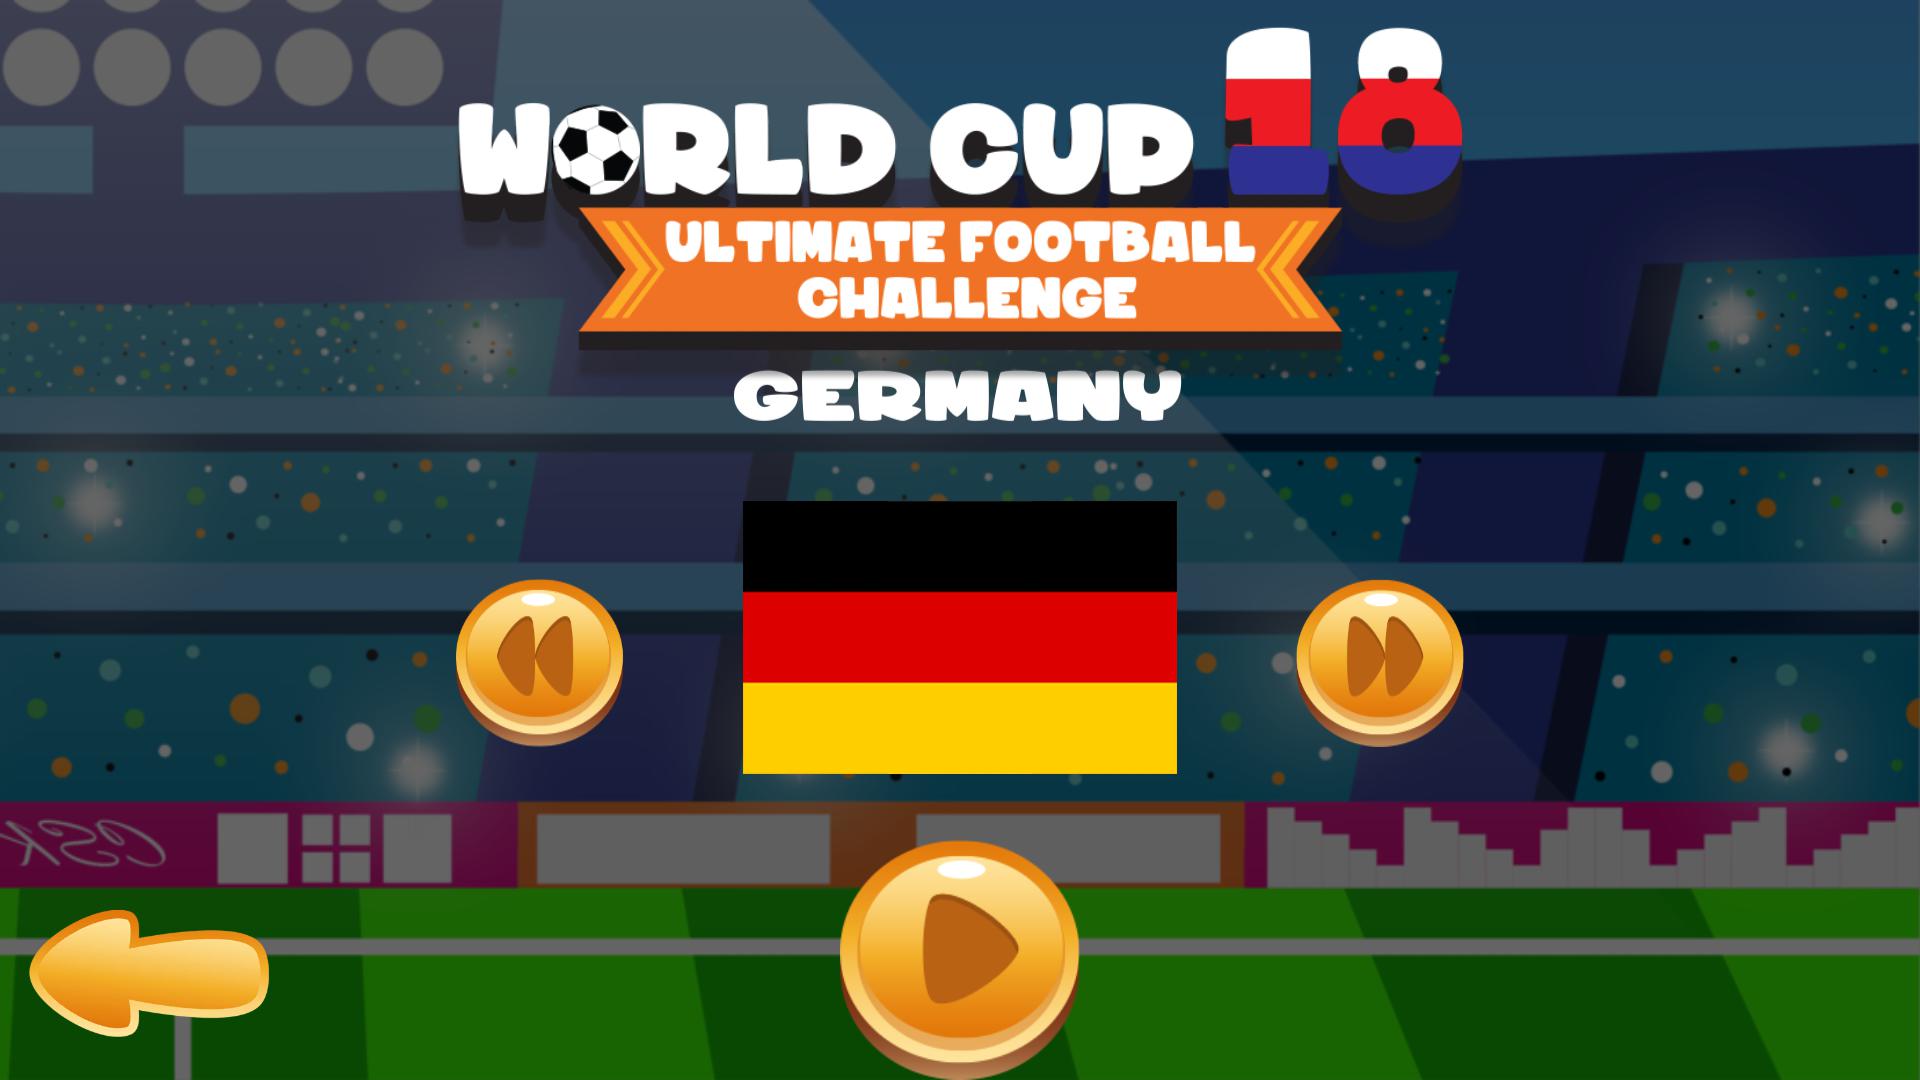 World cup 2018: Ultimate Football Challenge_游戏简介_图2